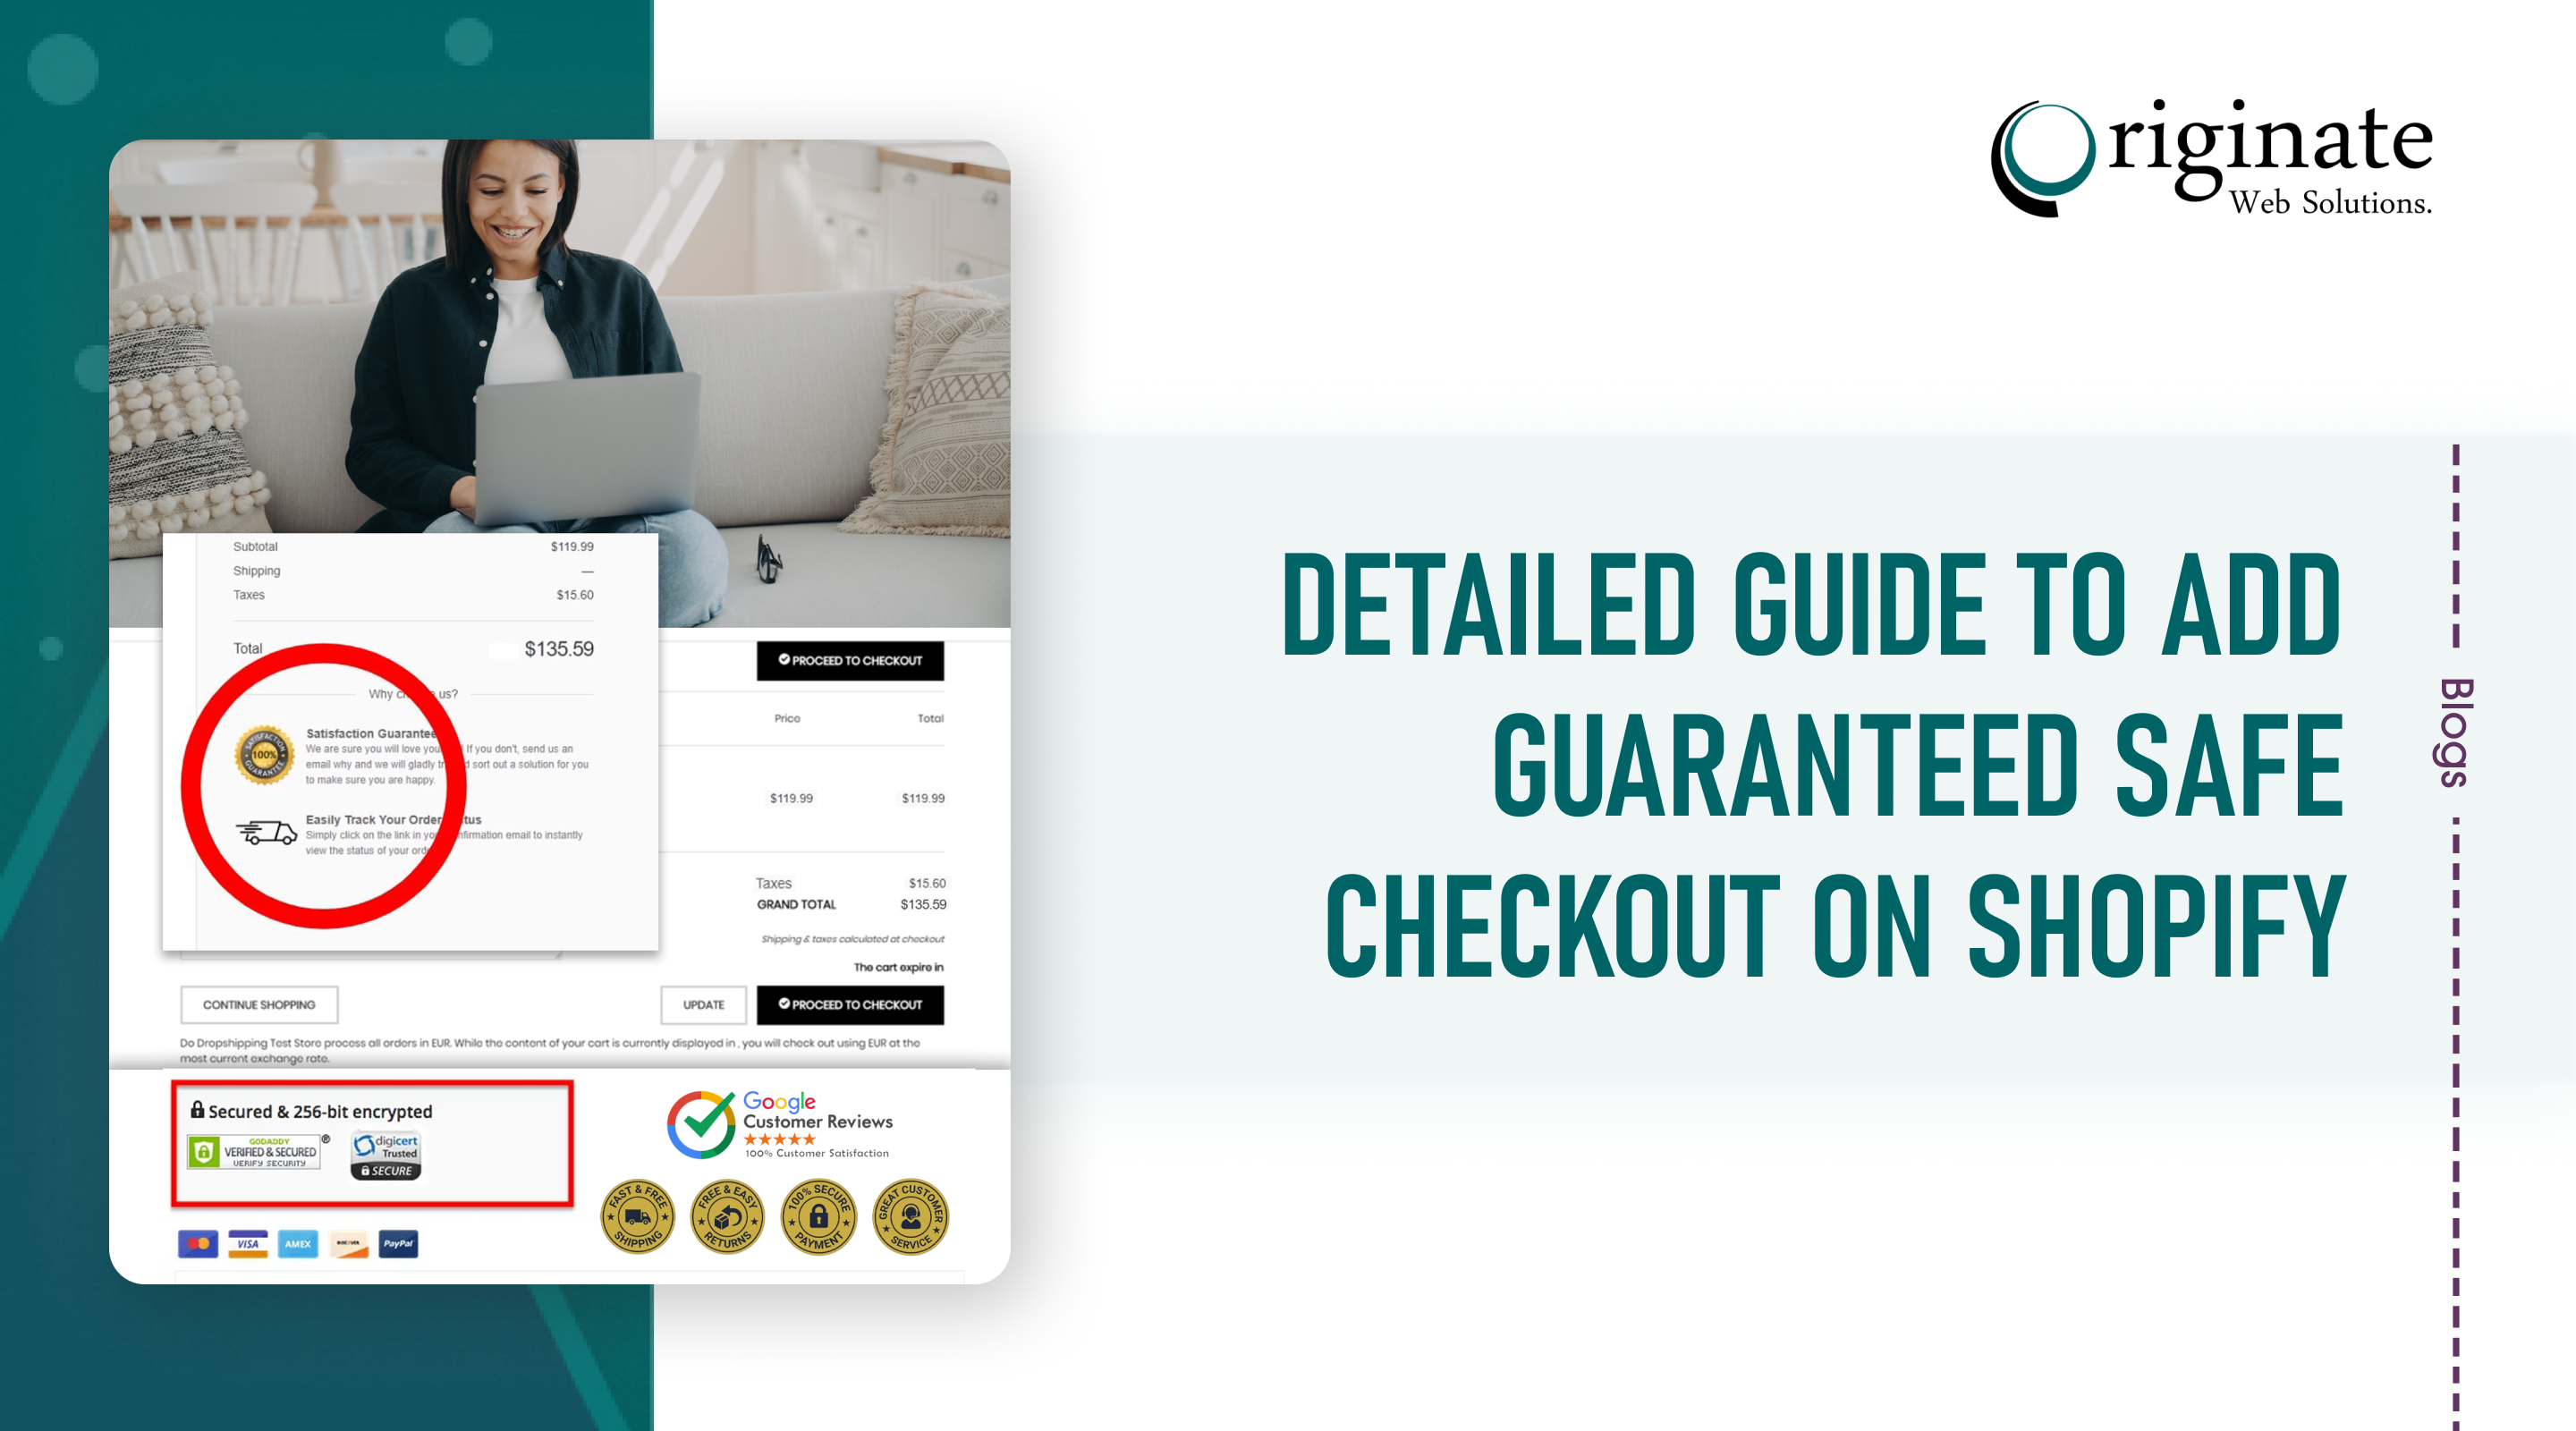 Detailed Guide To Add Guaranteed Safe Checkout on Shopify